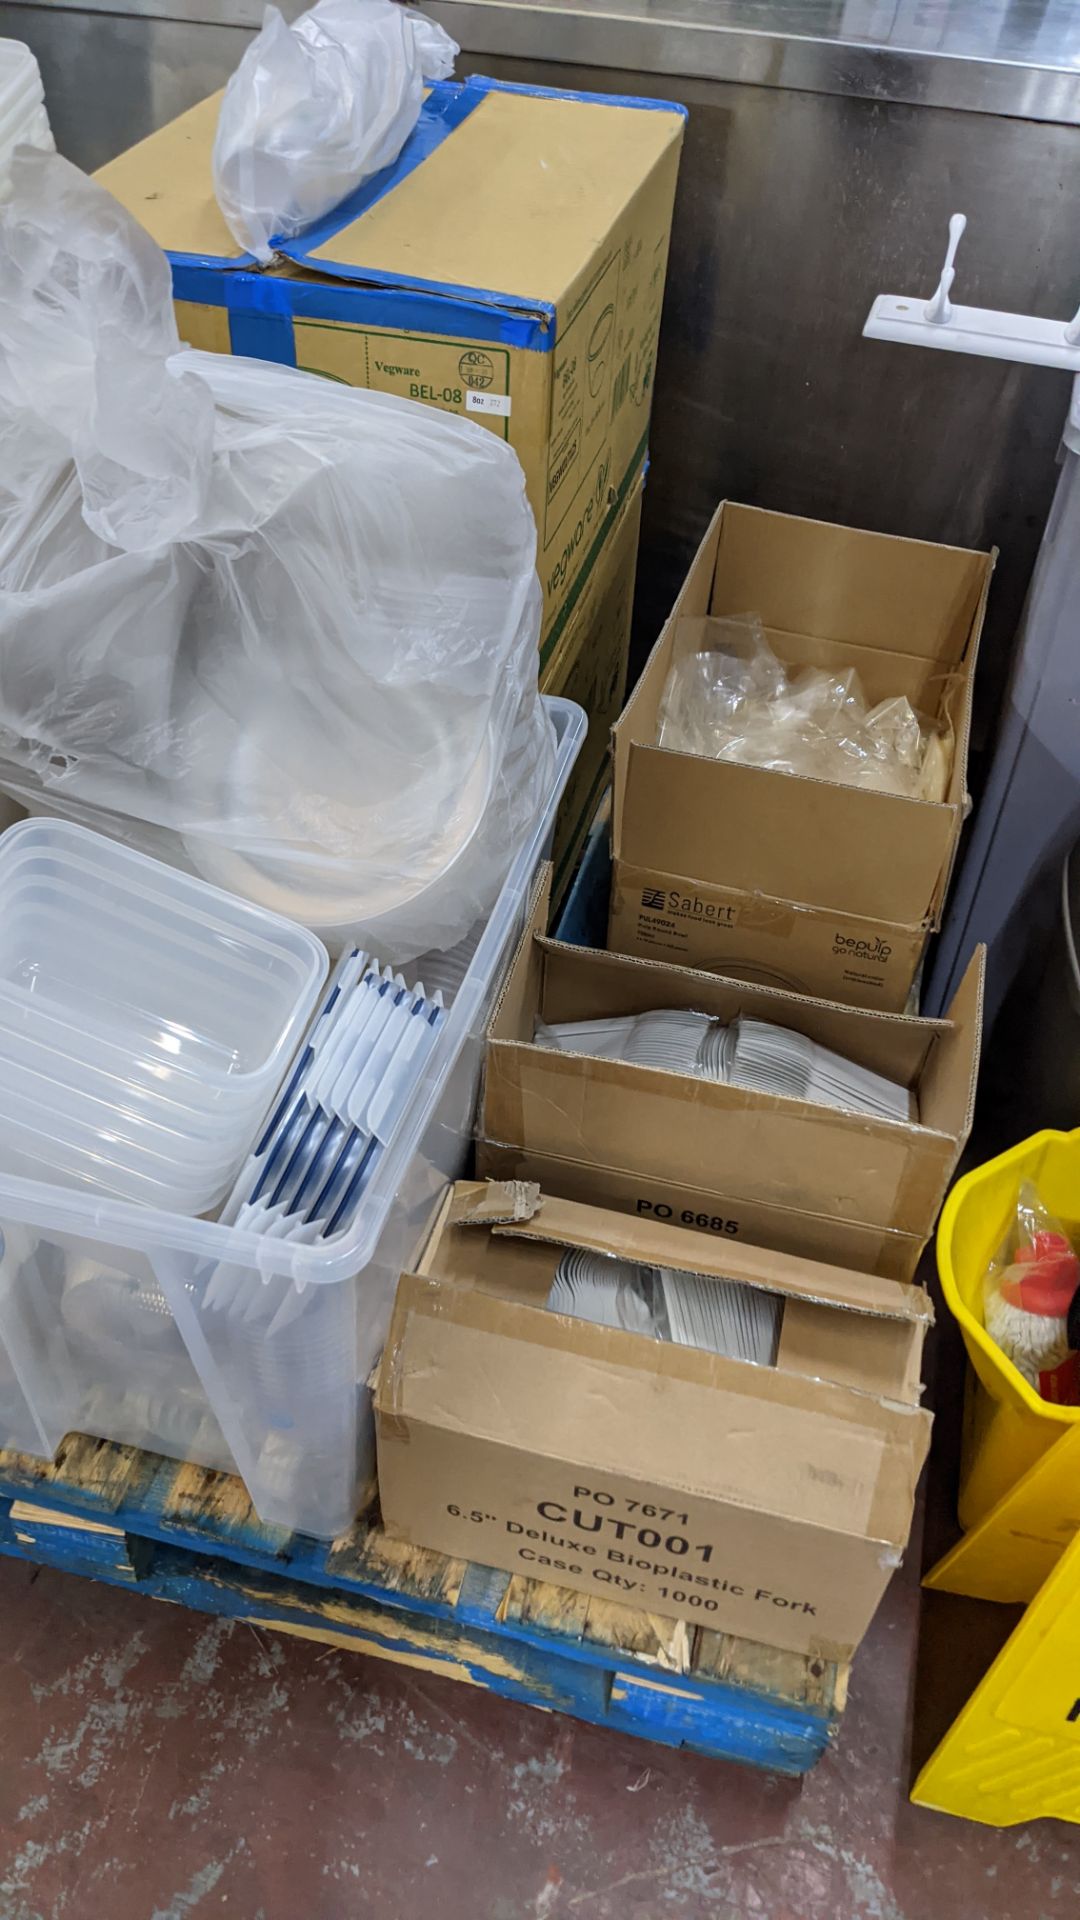 Contents of a pallet of disposable food containers, cups, cutlery & related items - Image 8 of 10